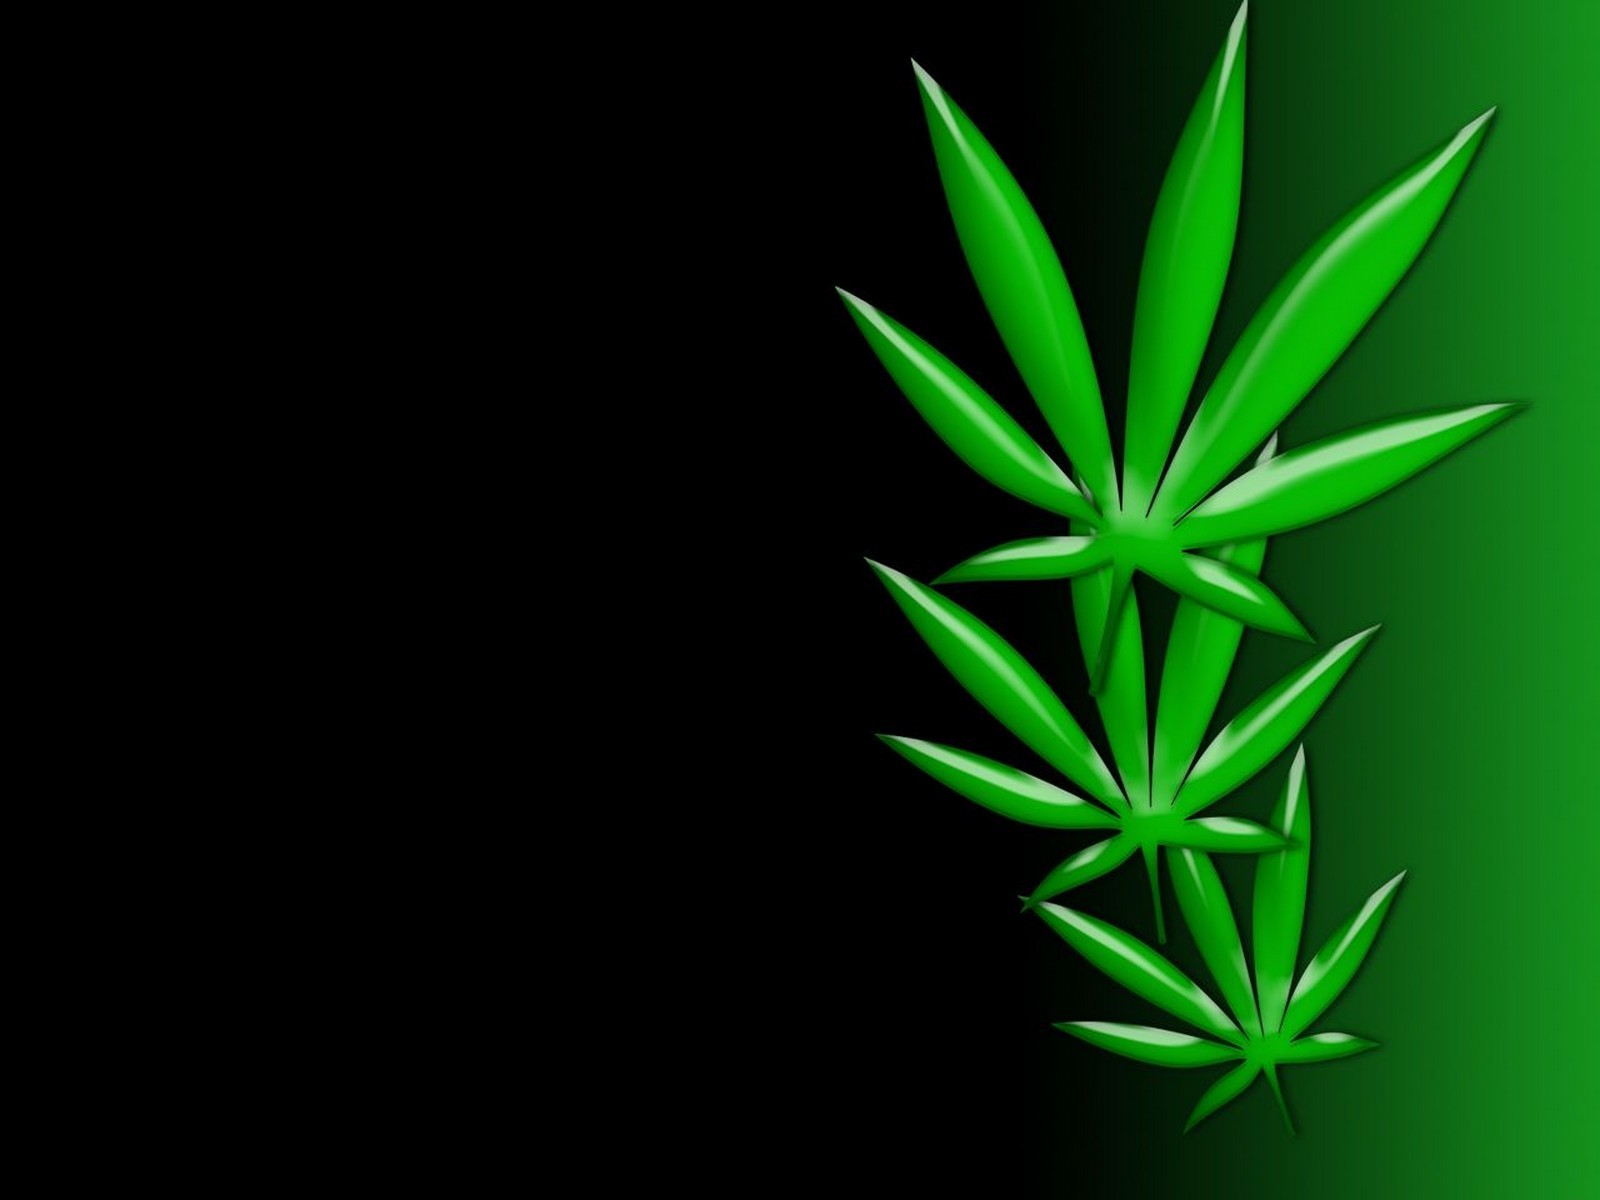 Weed Hd Wallpaper For Mobile